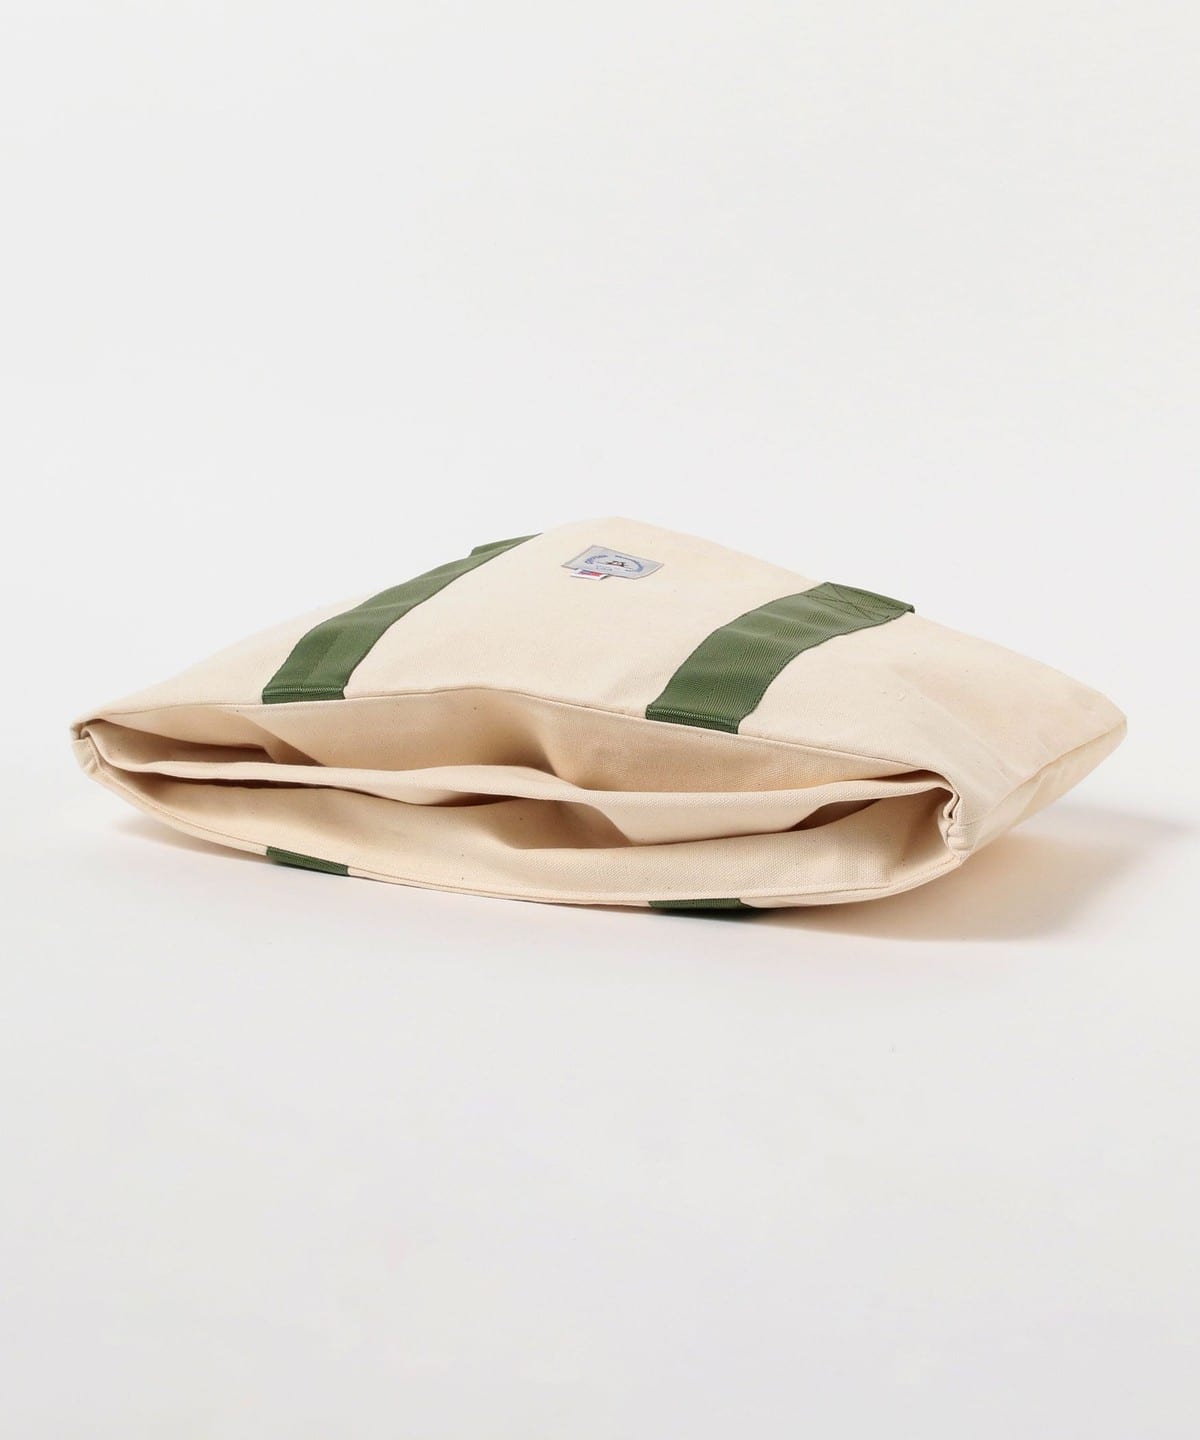 fennica（フェニカ）EPPERSON MOUNTAINEERING / CANVAS LUNCH BAG with